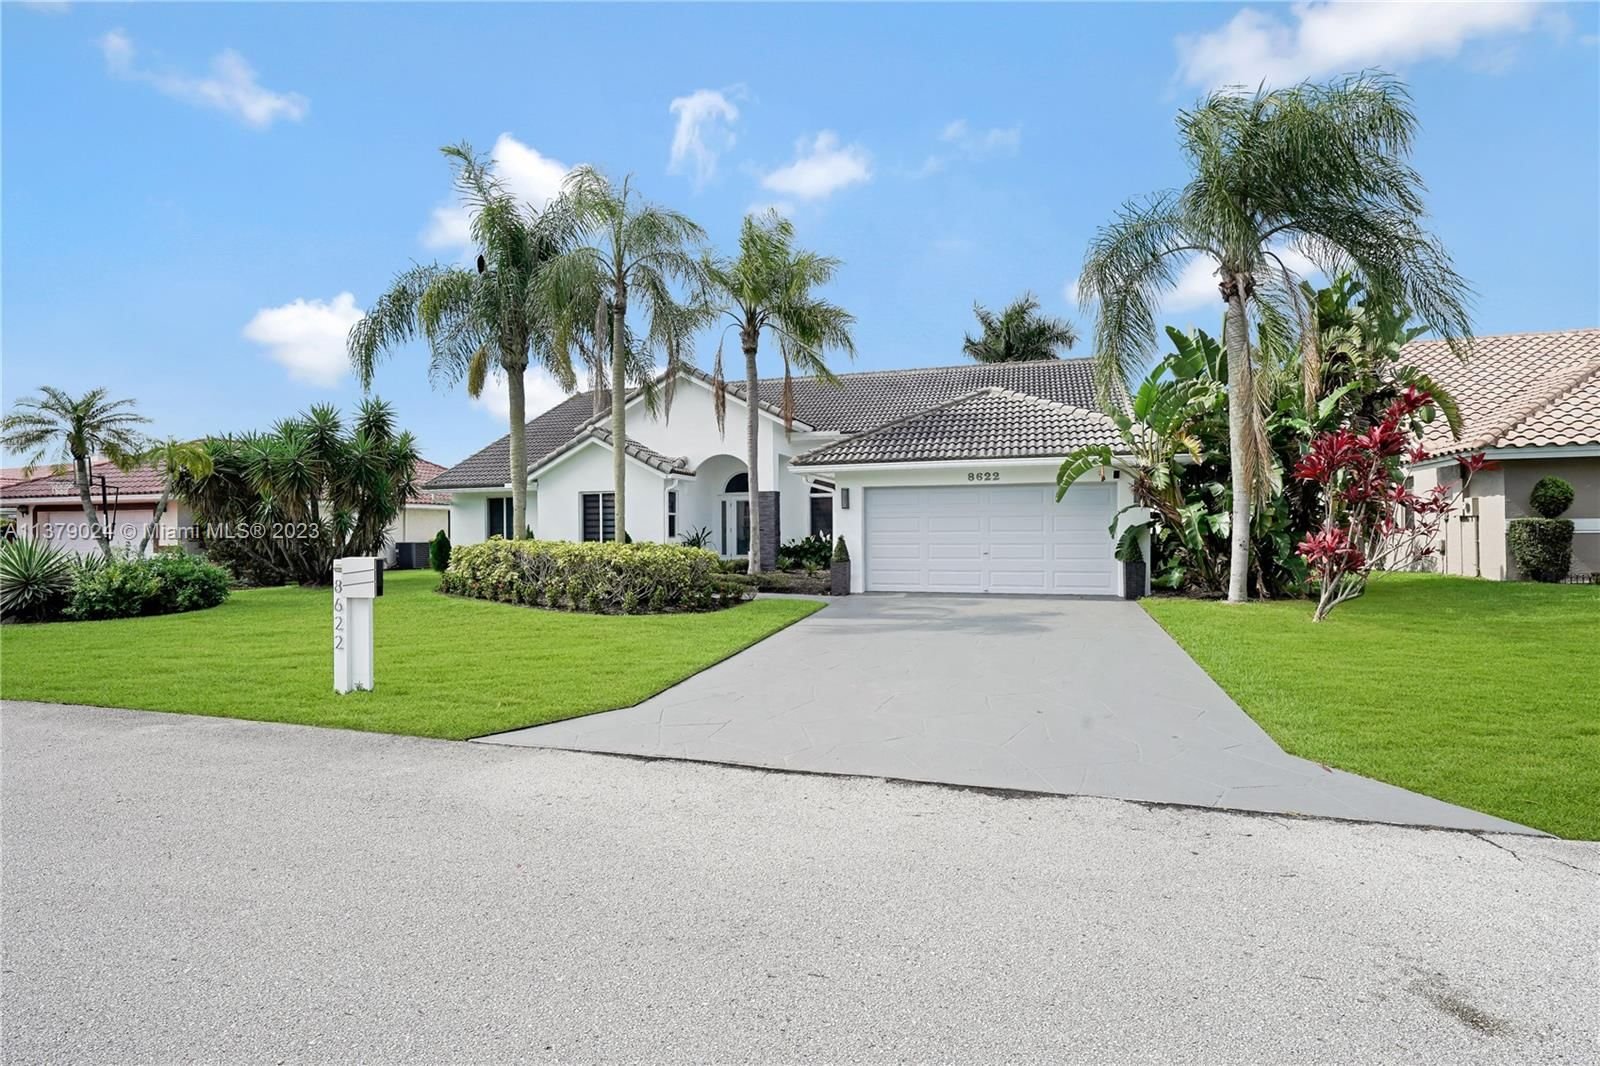 Real estate property located at 8622 79th St, Broward County, WOODMONT, Tamarac, FL